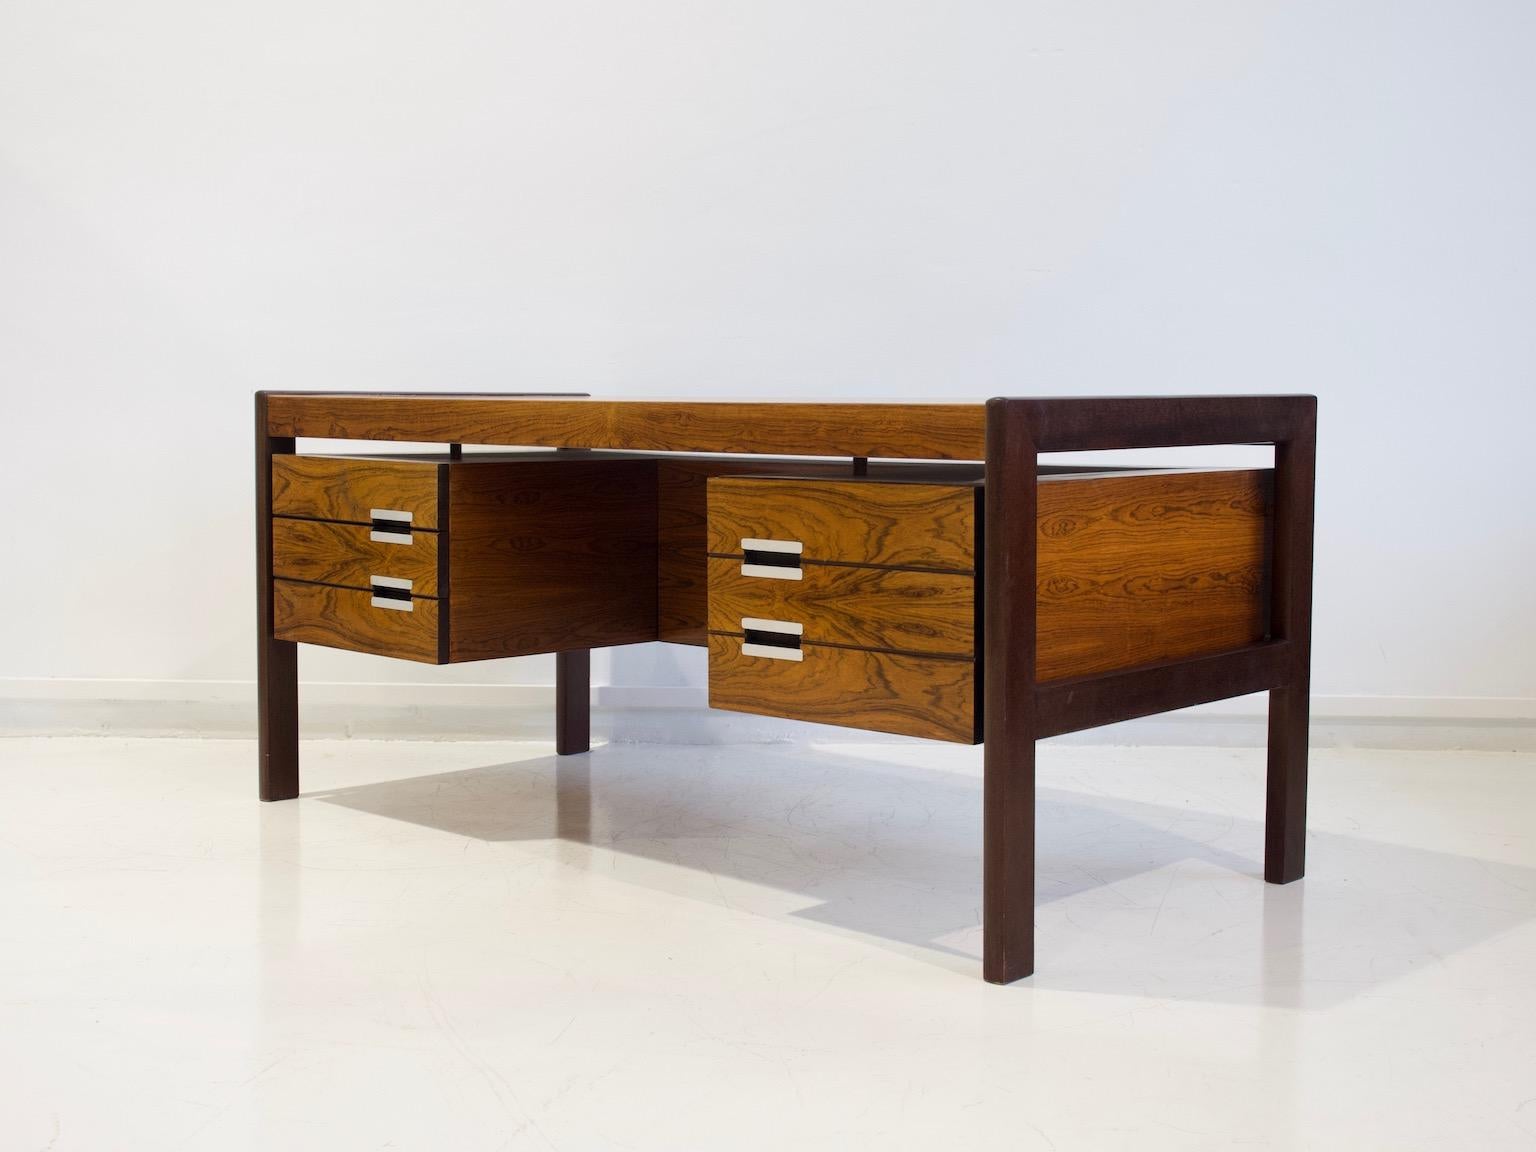 Writing table made of veneered hardwood by Dyrlund Smith, Denmark, in the 1960s. Fitted with one large and three small drawers with aluminum handles. There is a shelf at the back of the table. Labeled by manufacturer.